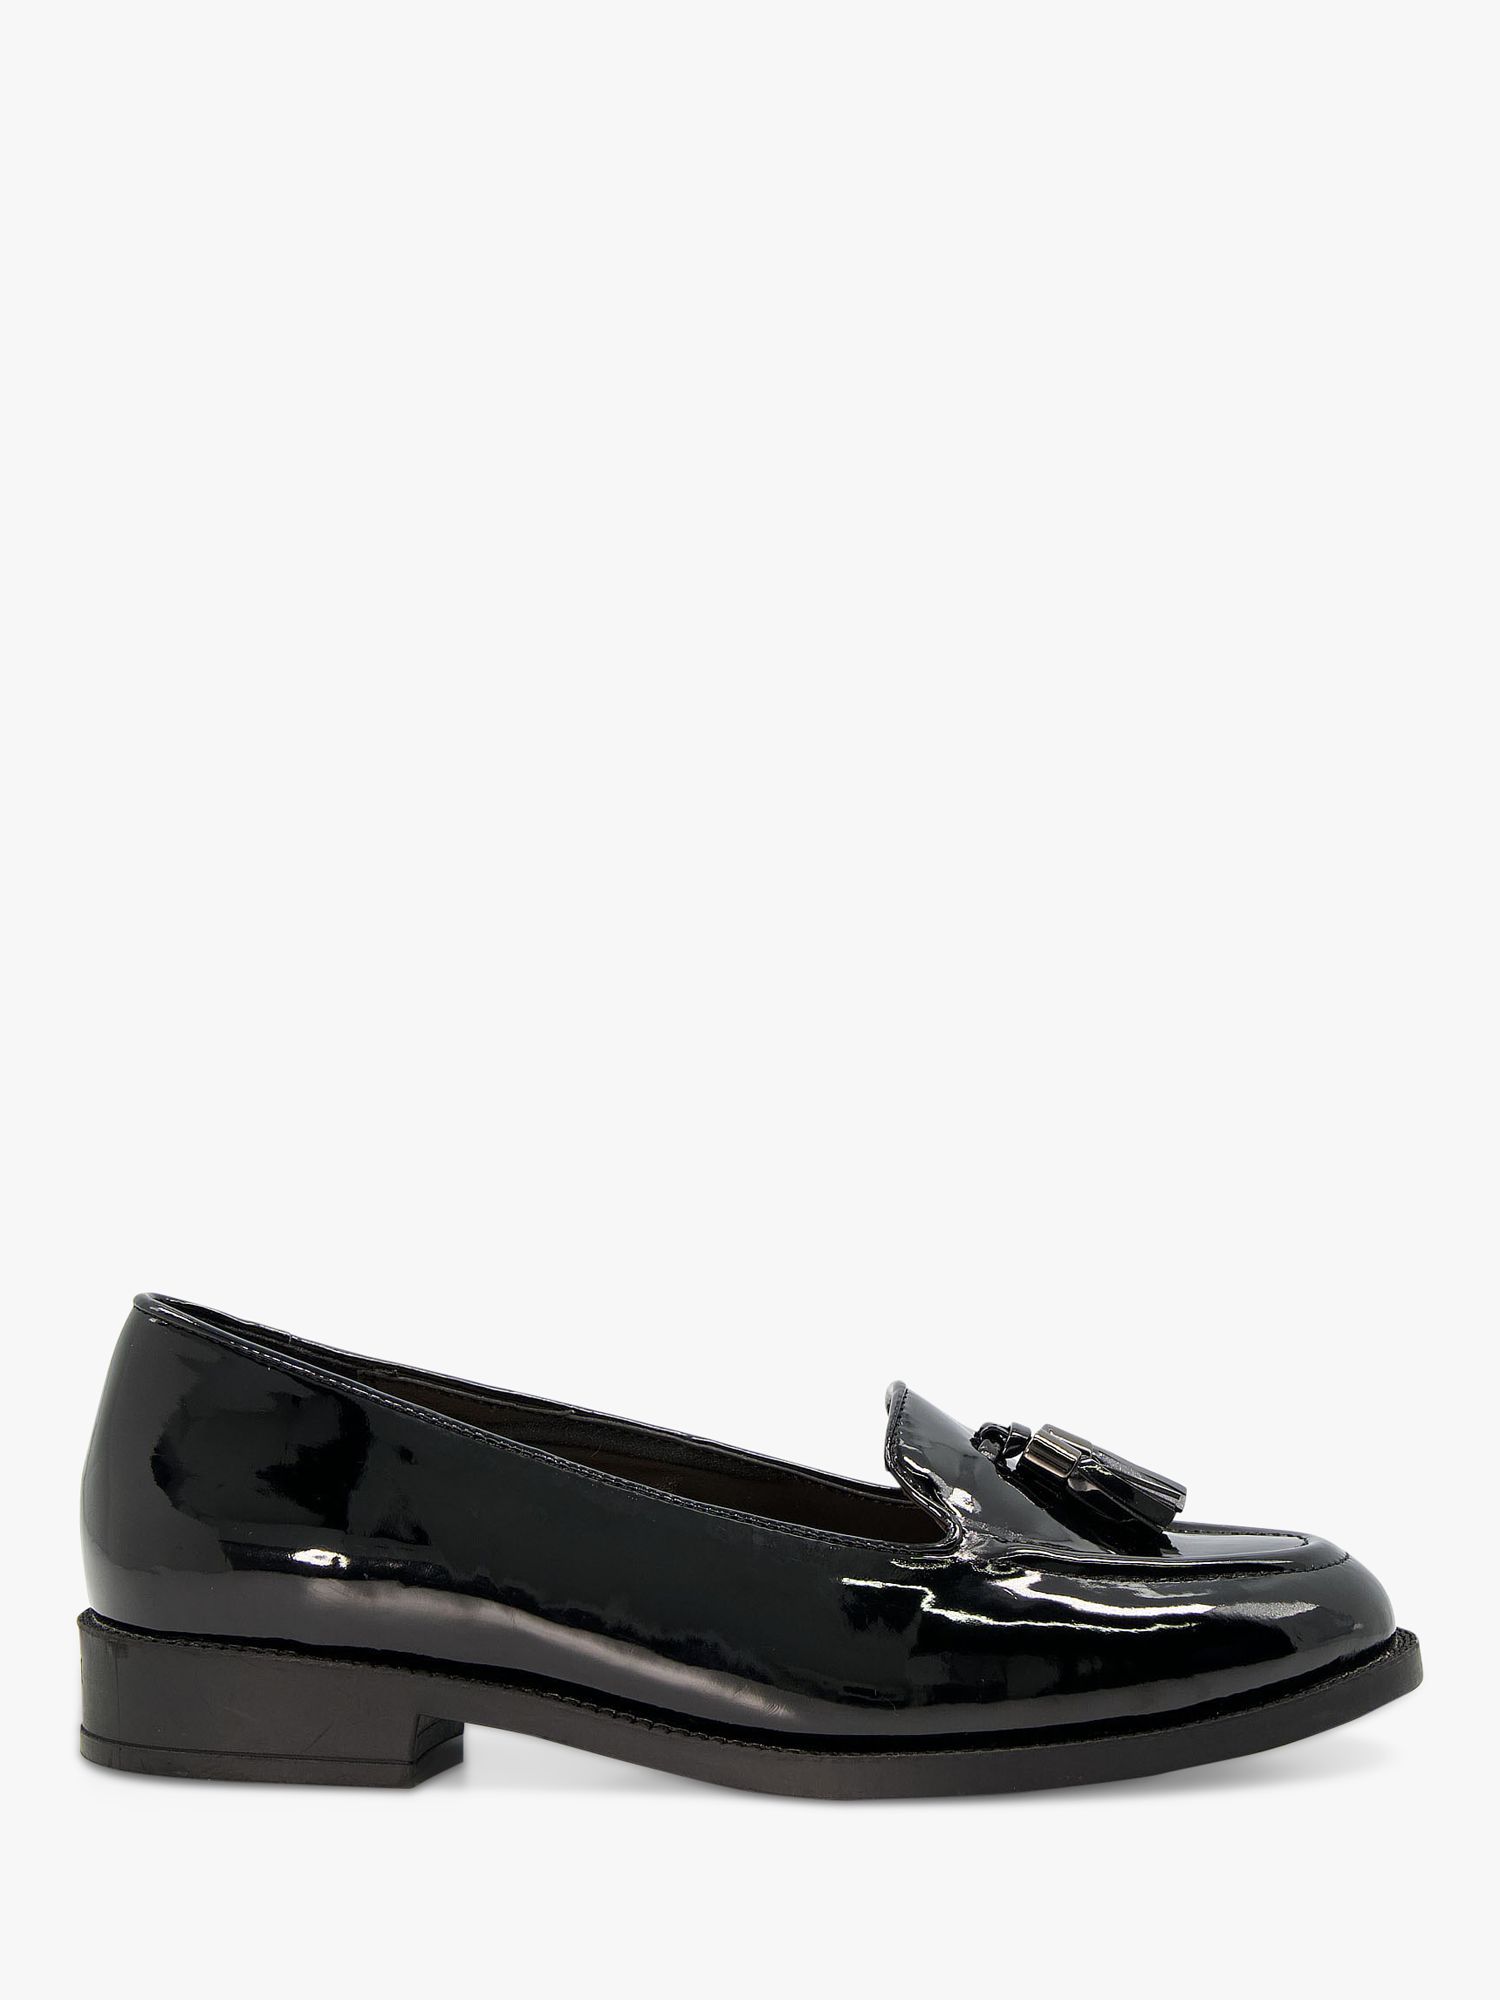 Dune Wide Fit Global Loafers, Black at John Lewis & Partners